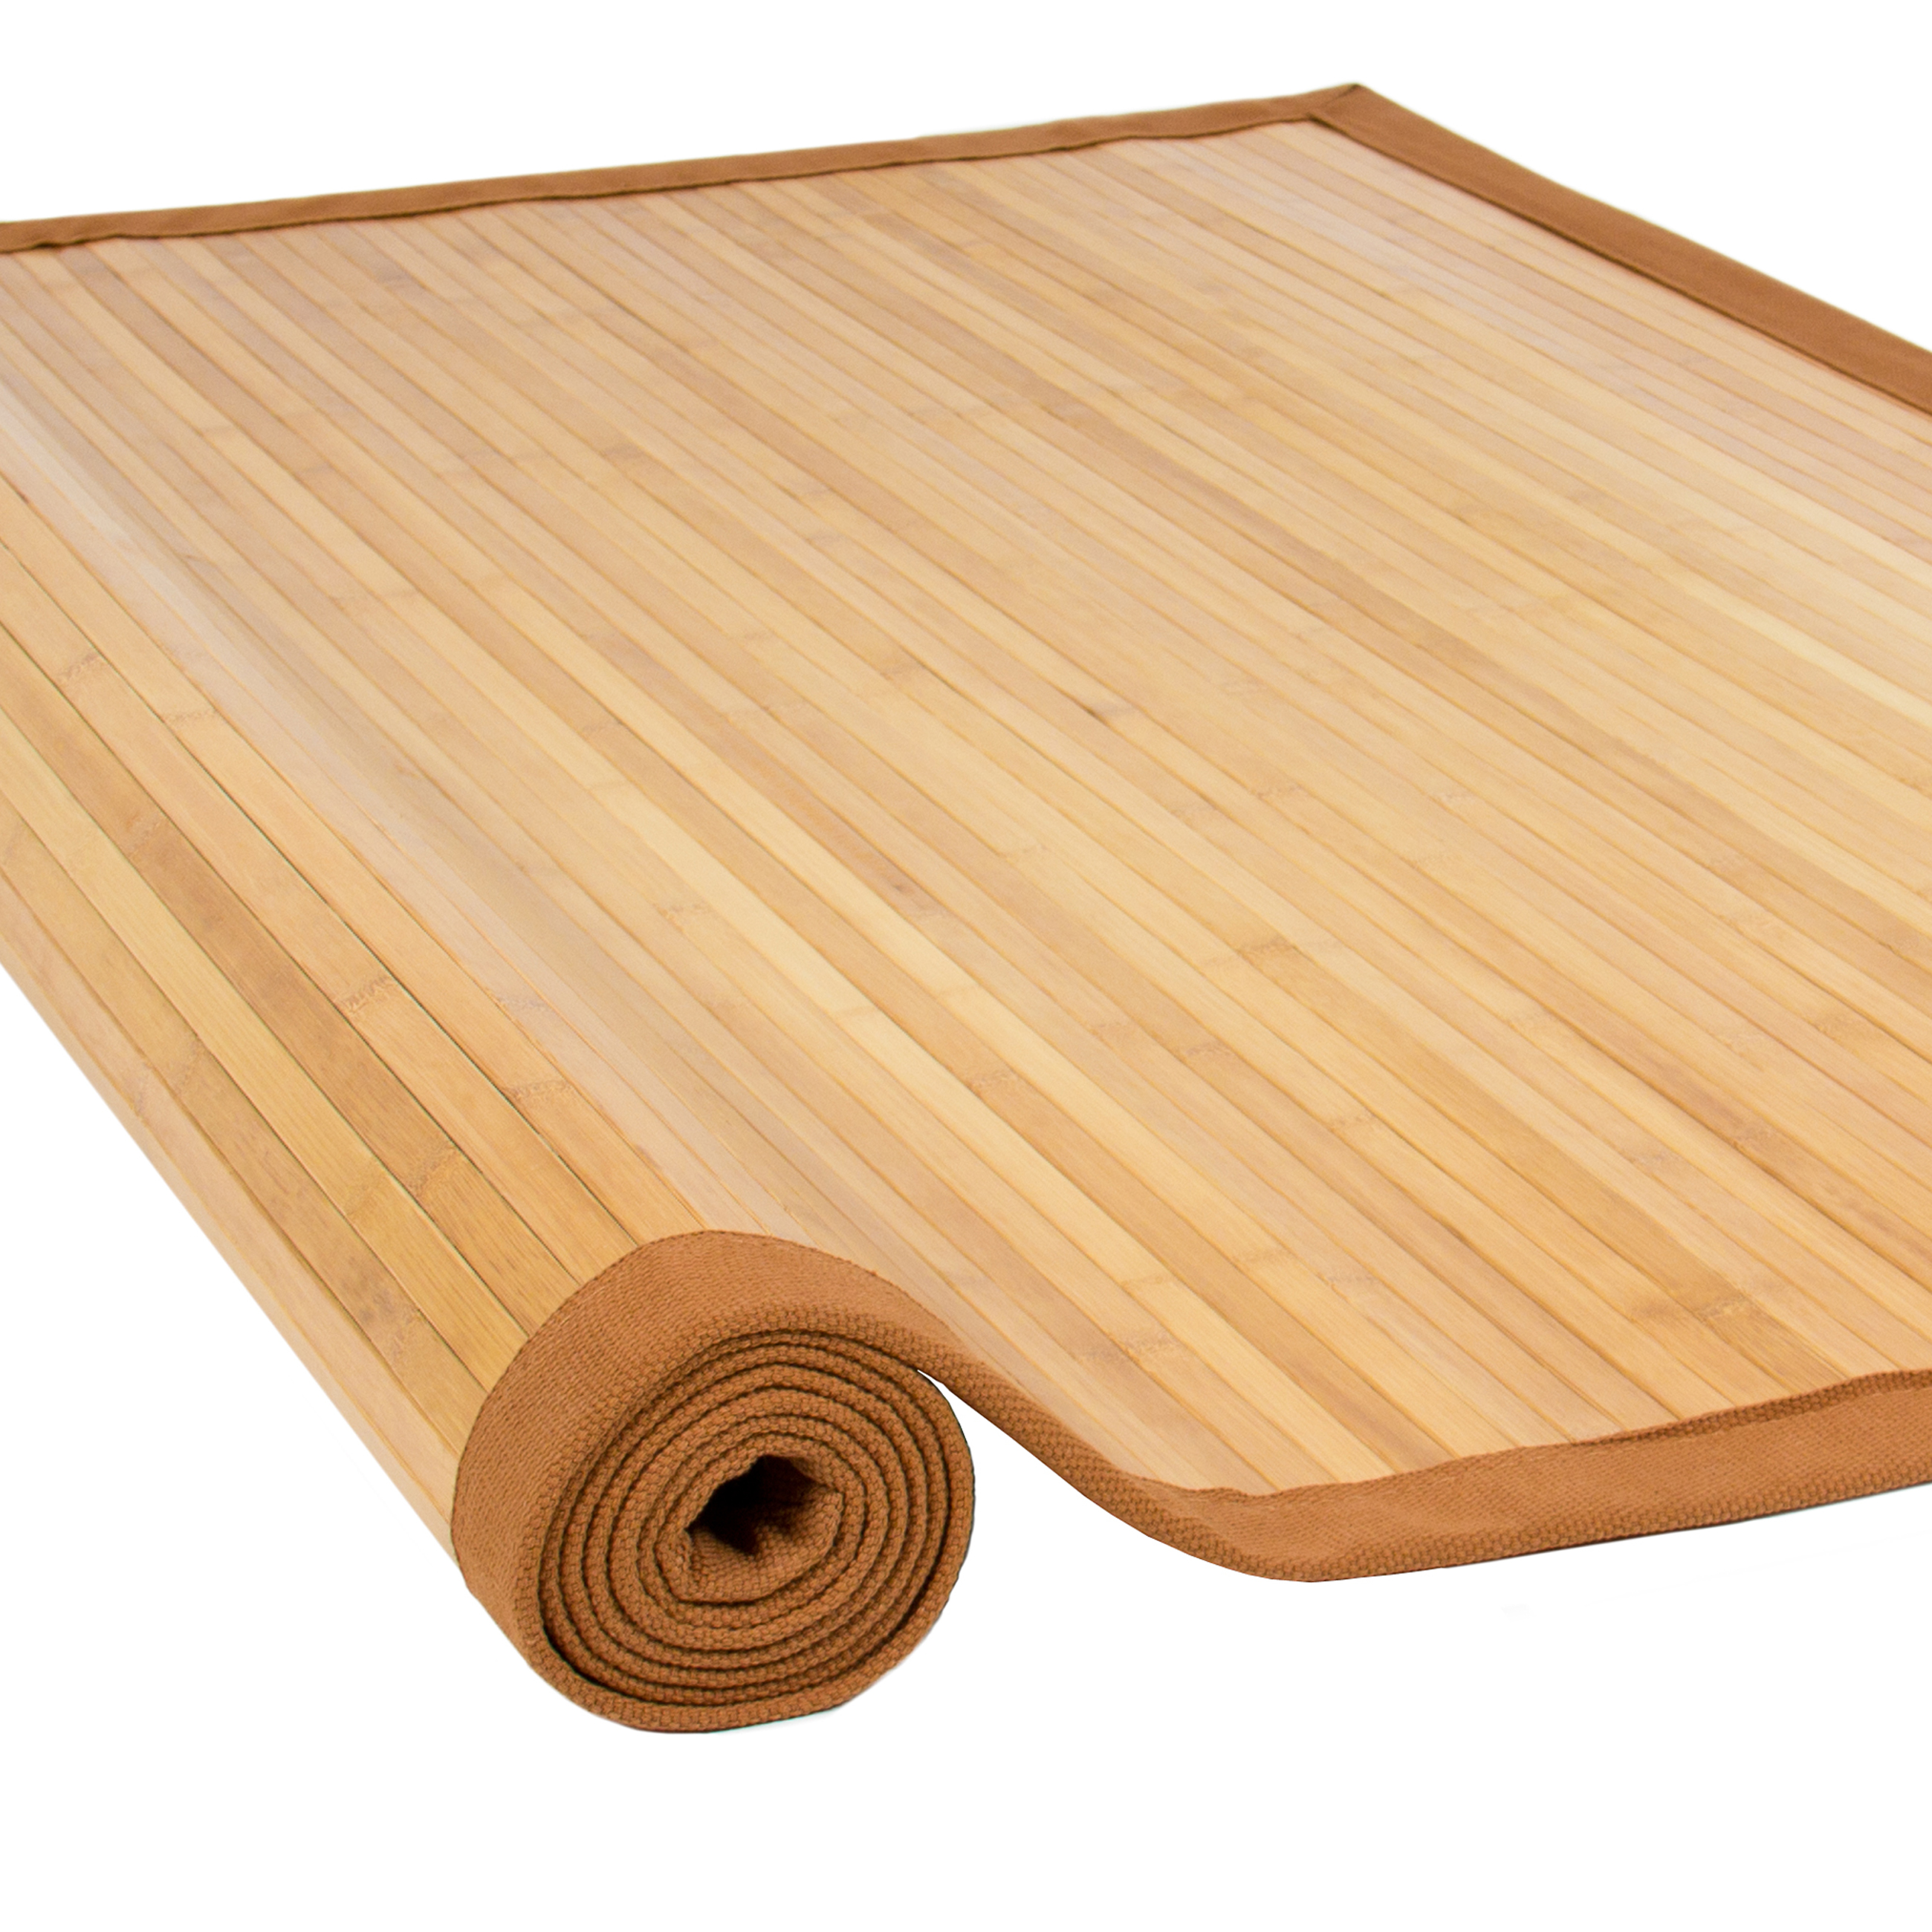 bamboo rug best choice products bamboo area rug carpet indoor 5u0027 x 8u0027 100% natural PCTFHVQ